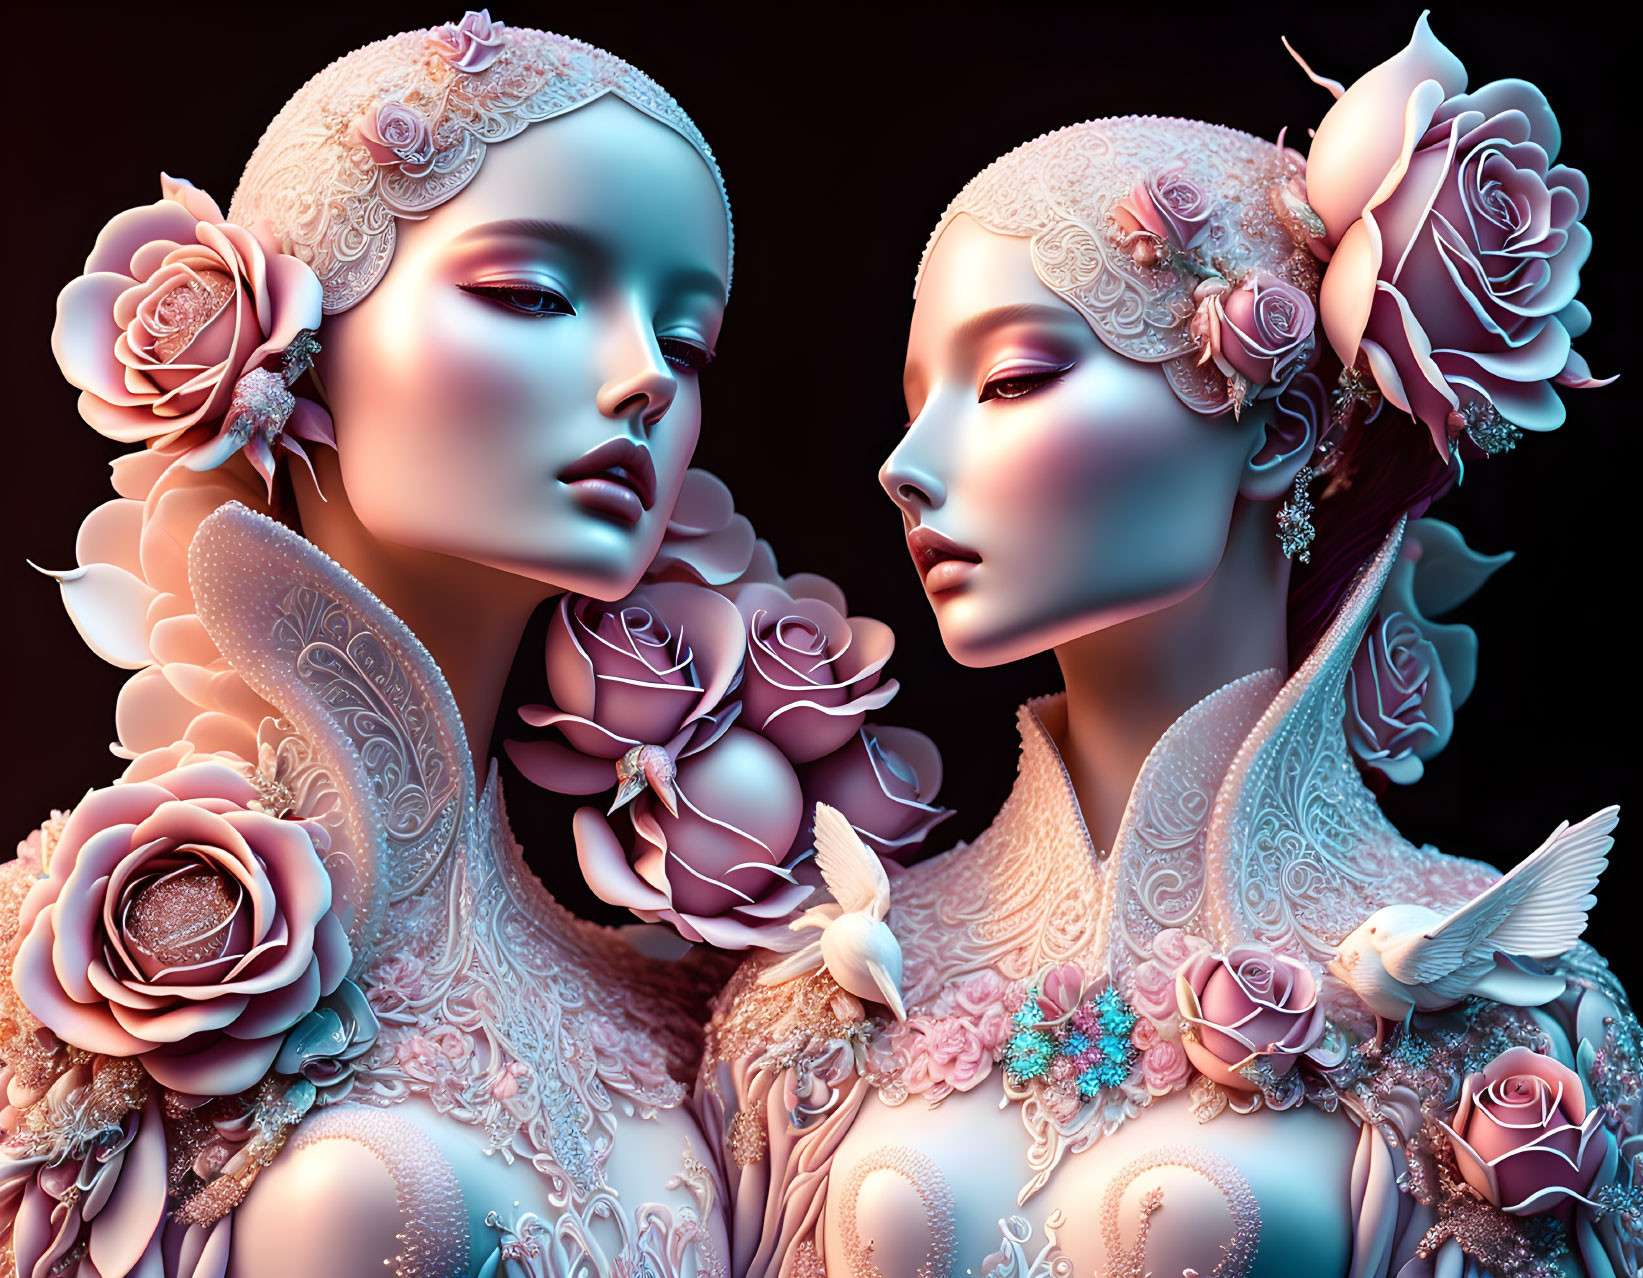 Ornate stylized female figures with floral designs and pastel bird on dark background